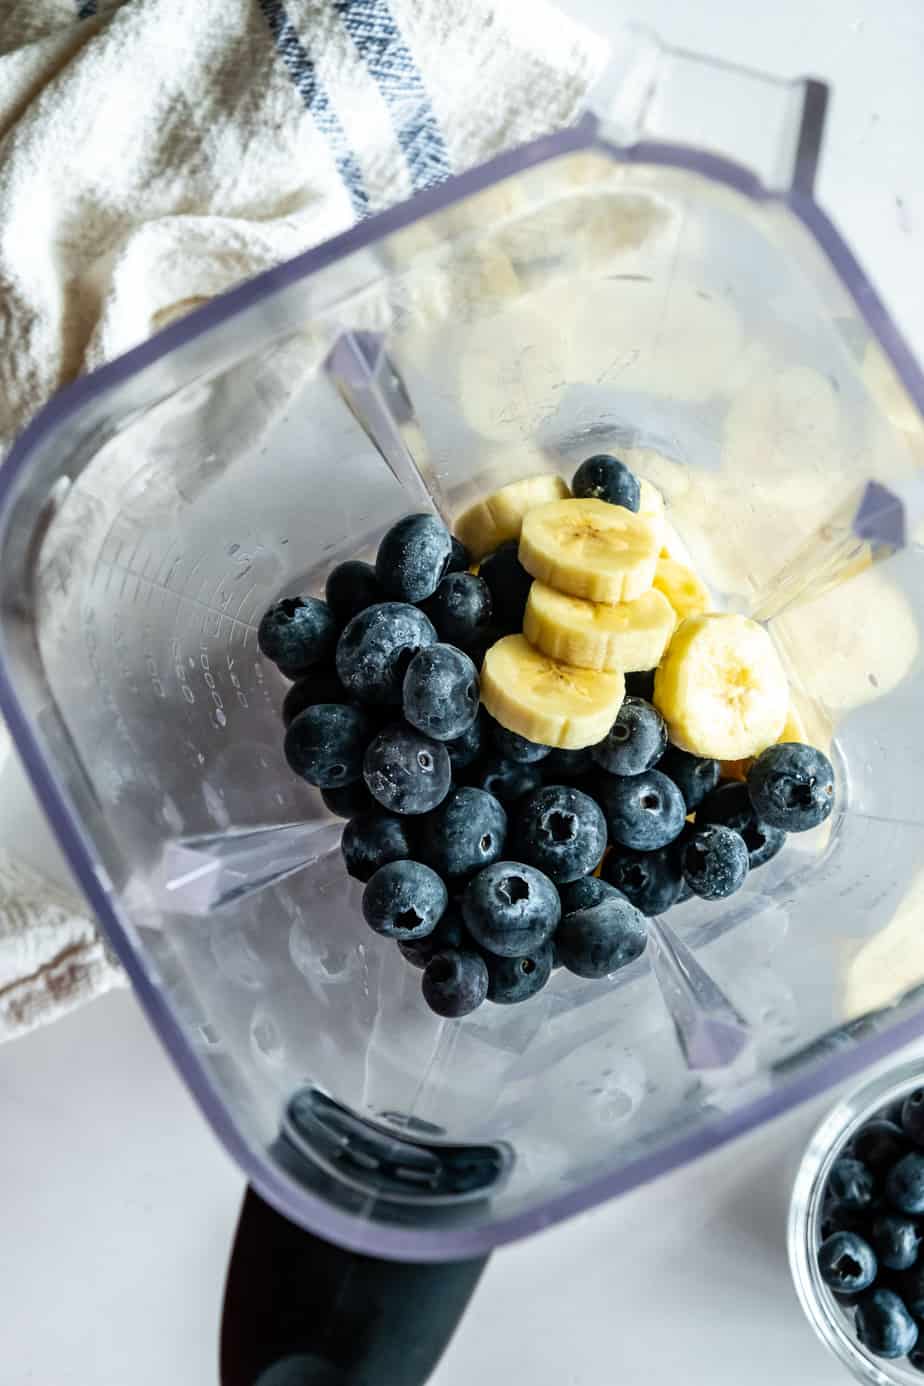 Bananas and blueberries in a blender.